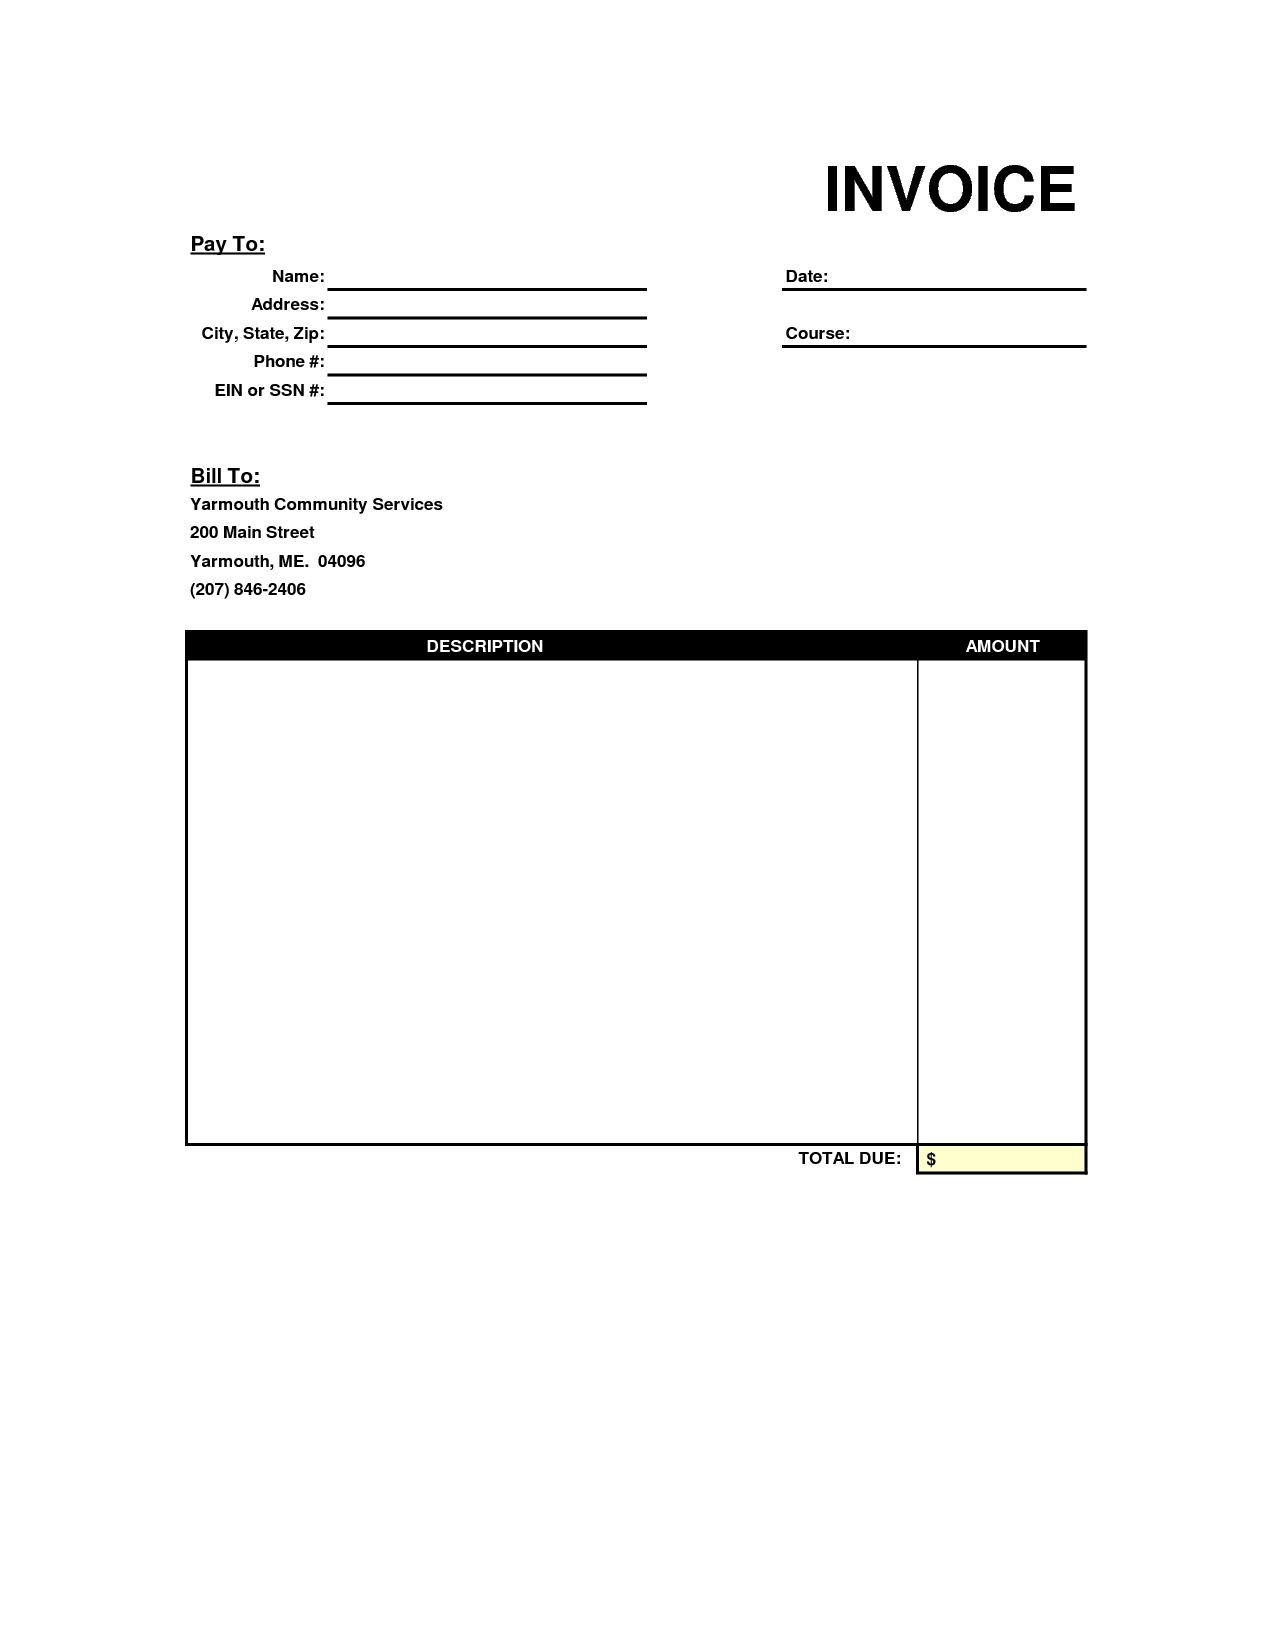 blank copy of an invoice google recruiter resume copy of blank invoices printable for word